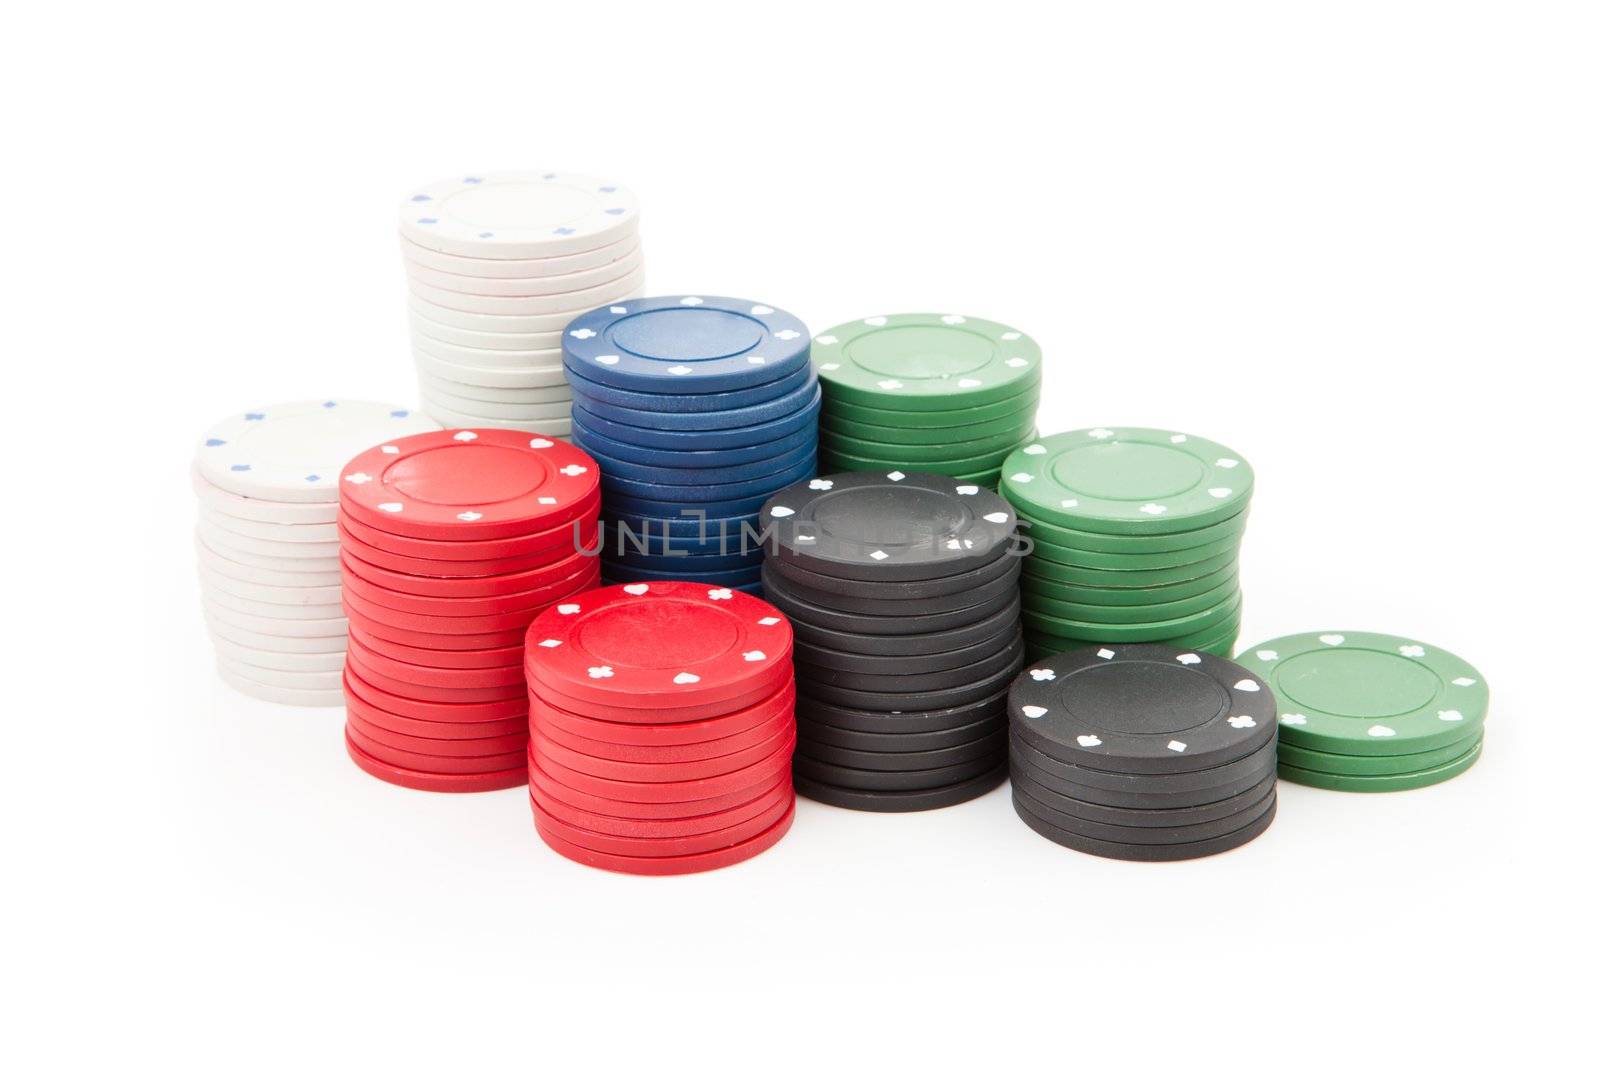 Poker coins stacked up together against a white background